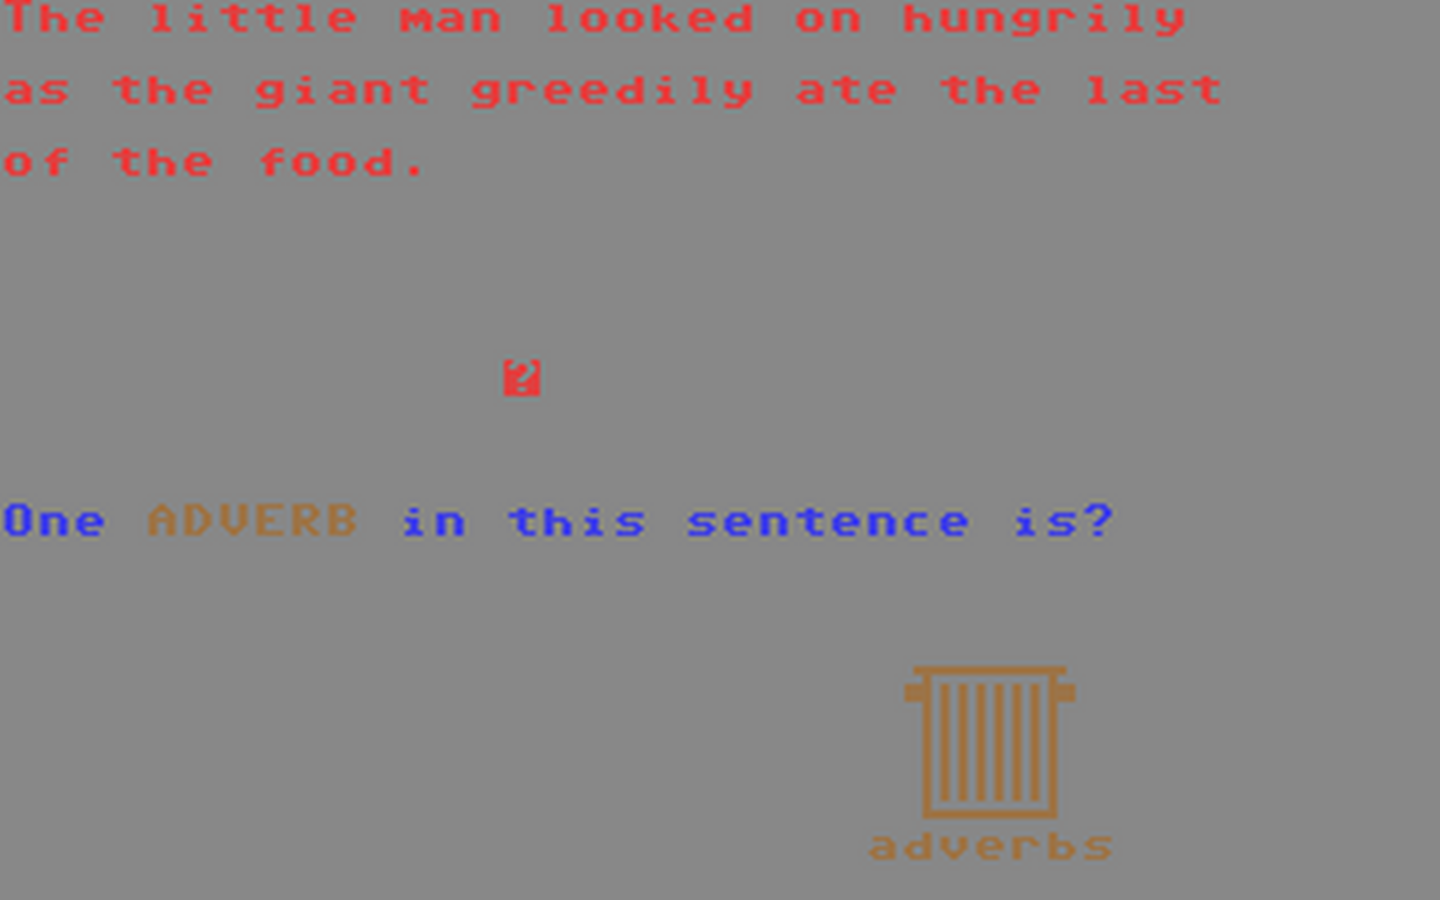 C64 GameBase Ladders_to_Learning_-_Adverbs McGraw-Hill_Ryerson_Ltd. 1984